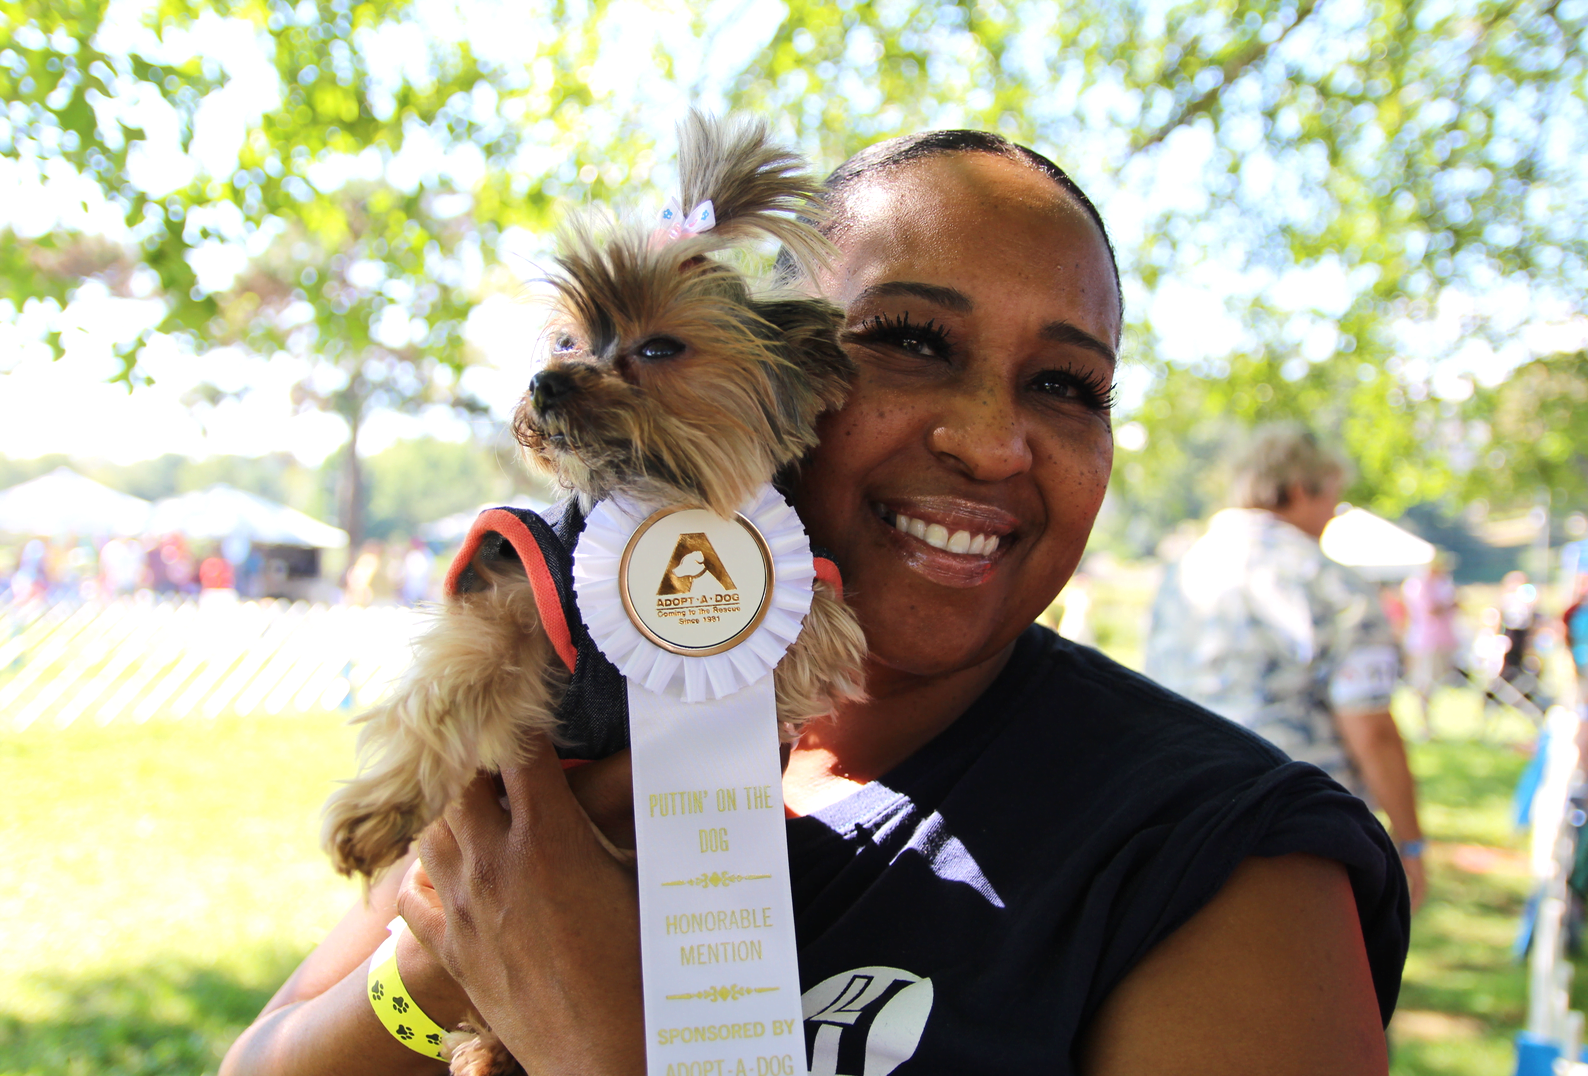 Linda Pizarro and her dog Willow who won an Honorable Mention in "Pick of the Litter" at Puttin' on the Dog, Sept. 16, 2018 Photo: Leslie Yager